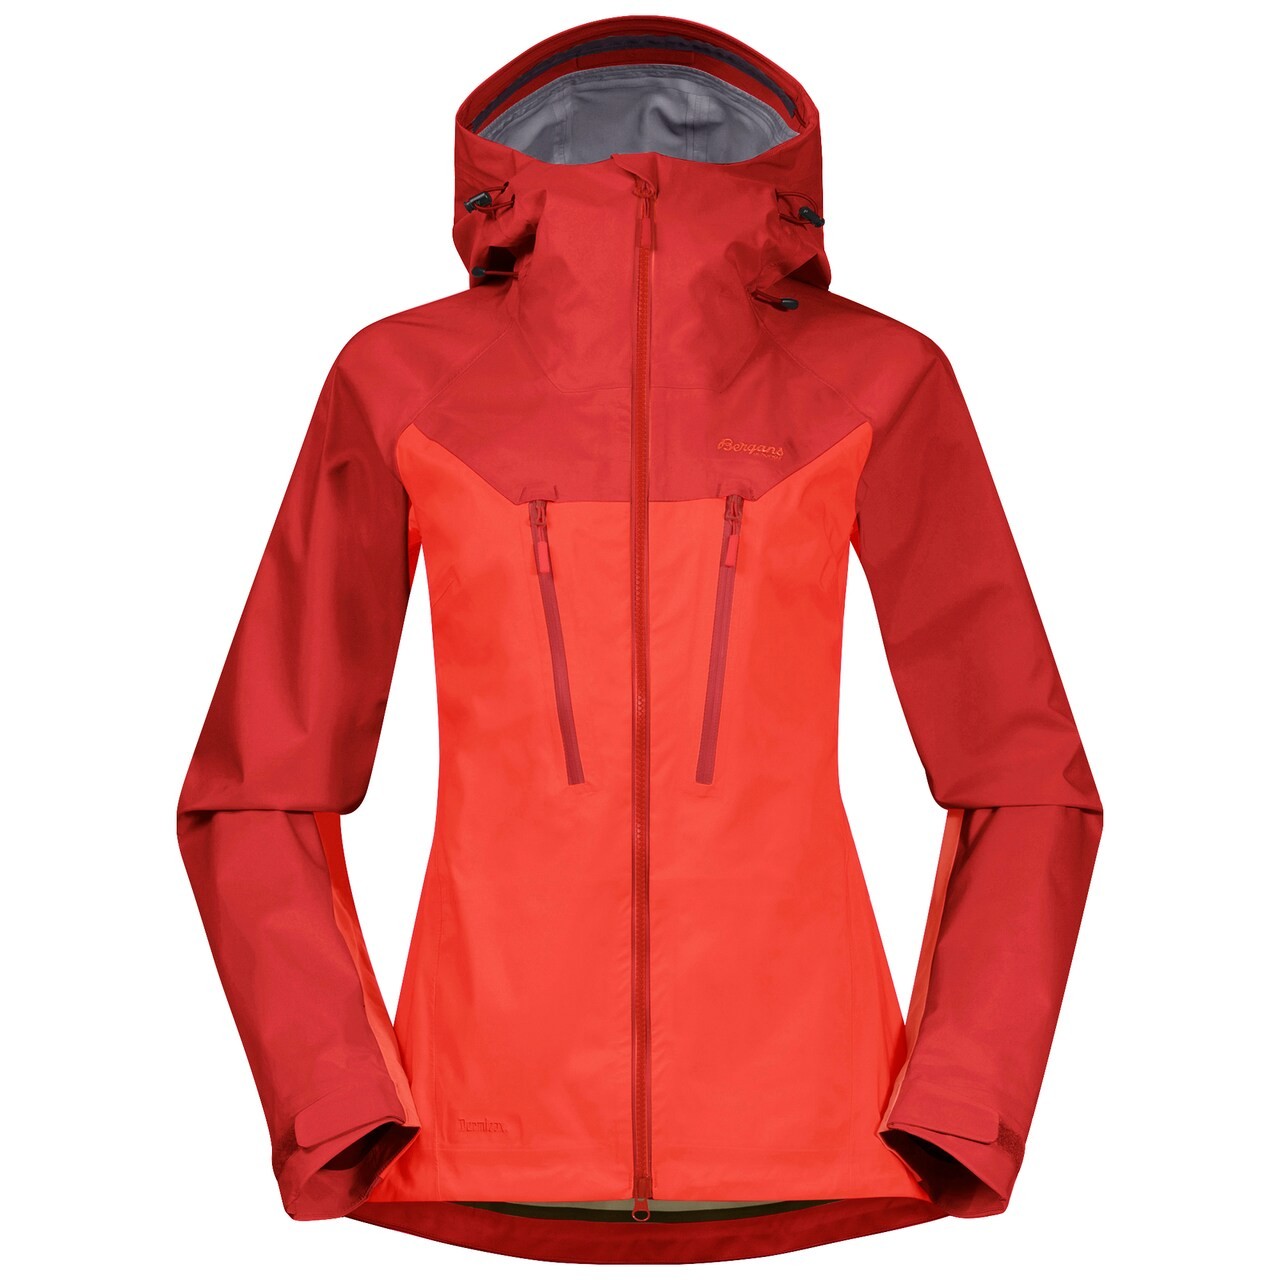 Cecilie 3L Jacket Wm, energy red